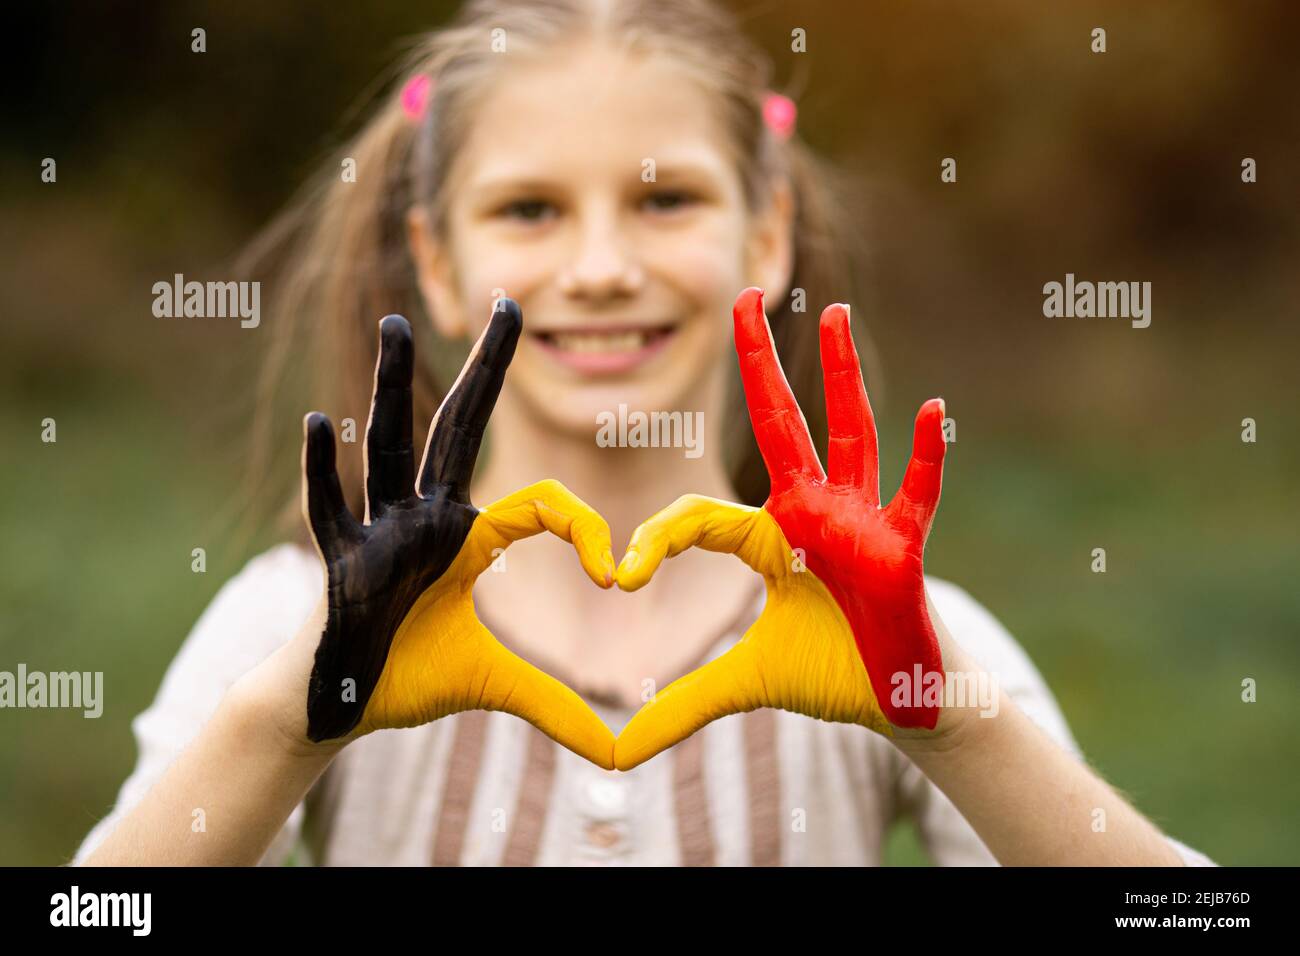 Kid hands painted in Belgium flag color show symbol of heart and love gesture on nature background. Focus on hands Stock Photo